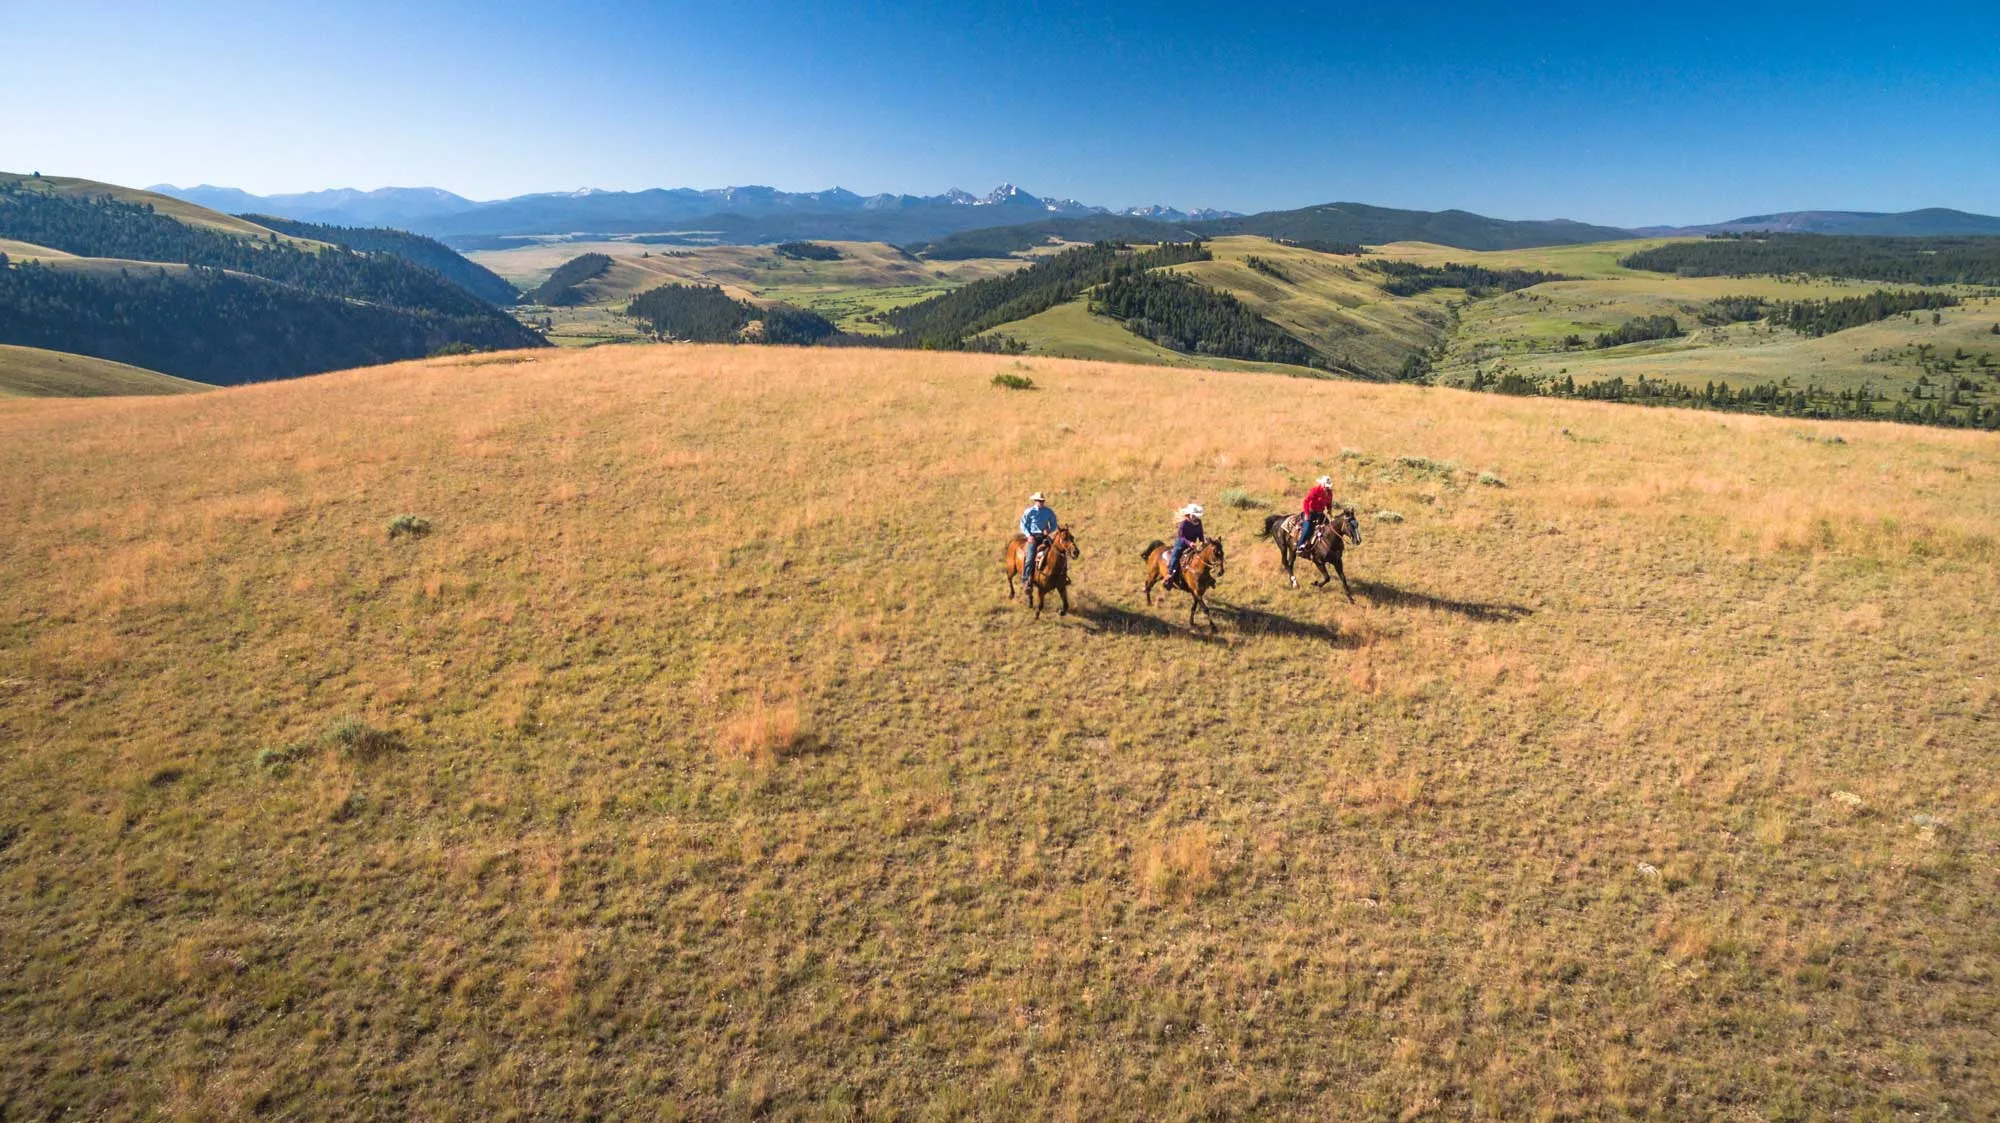 Aerial view of three people on horses in beautiful mountain scenery